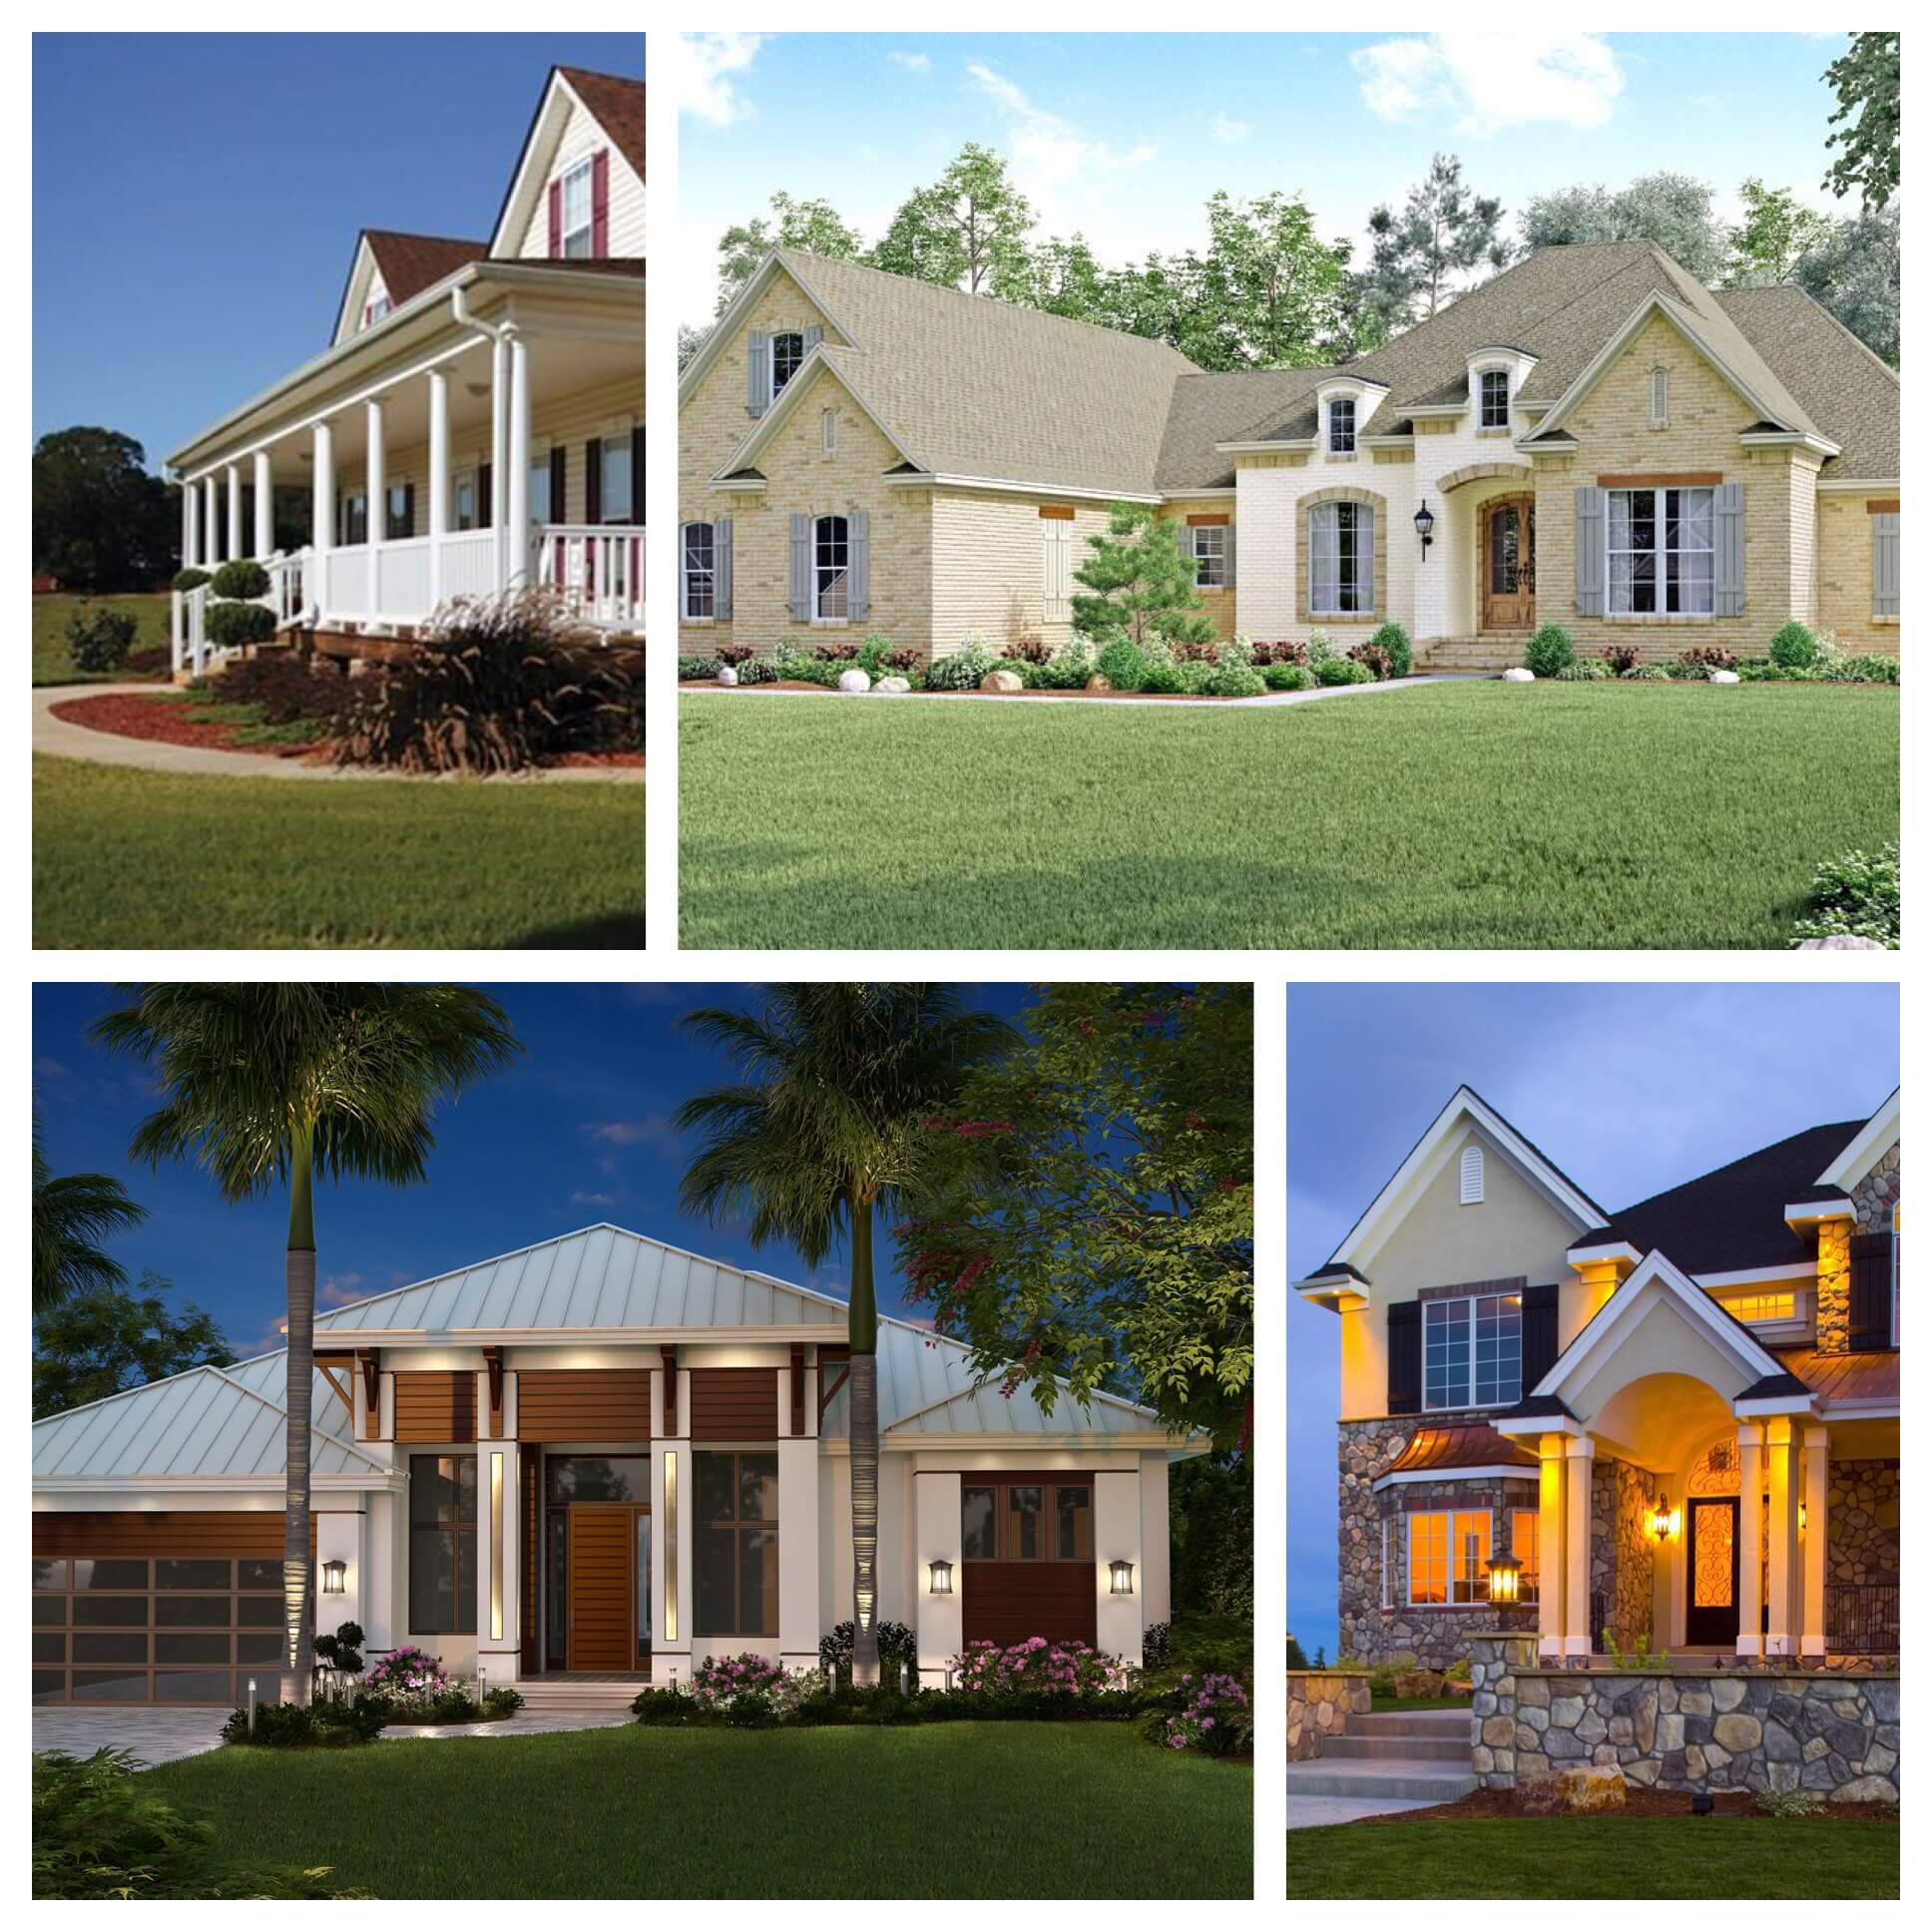 Examples of the many architectural styles for house plans available at The Plan Collection.